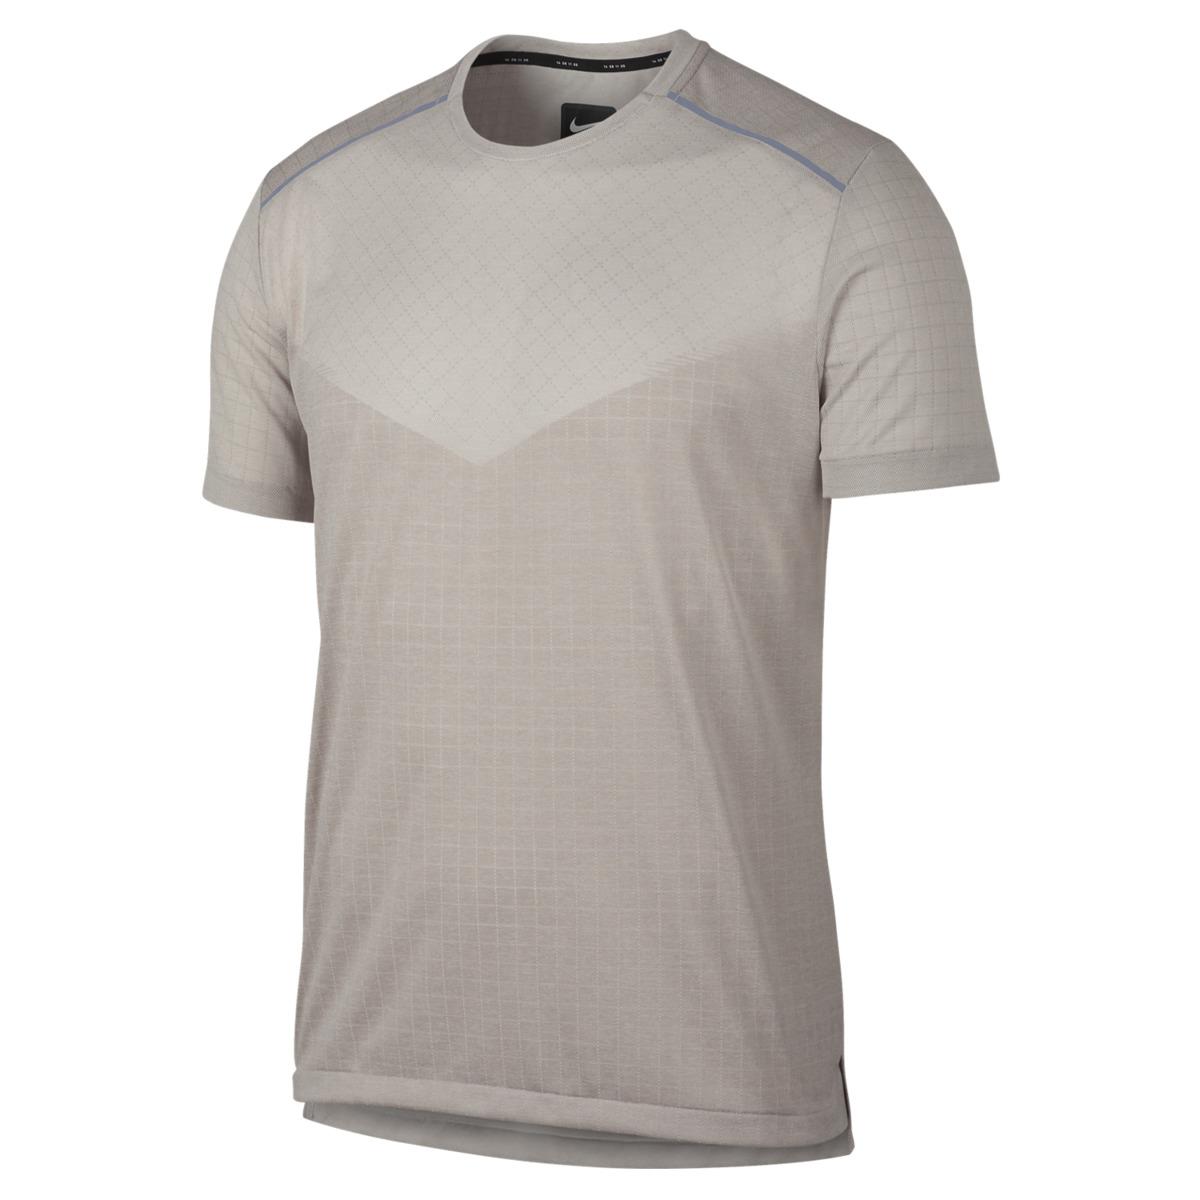 Nike Synthetic Tech Pack T-shirt in Grey (Gray) for Men - Lyst